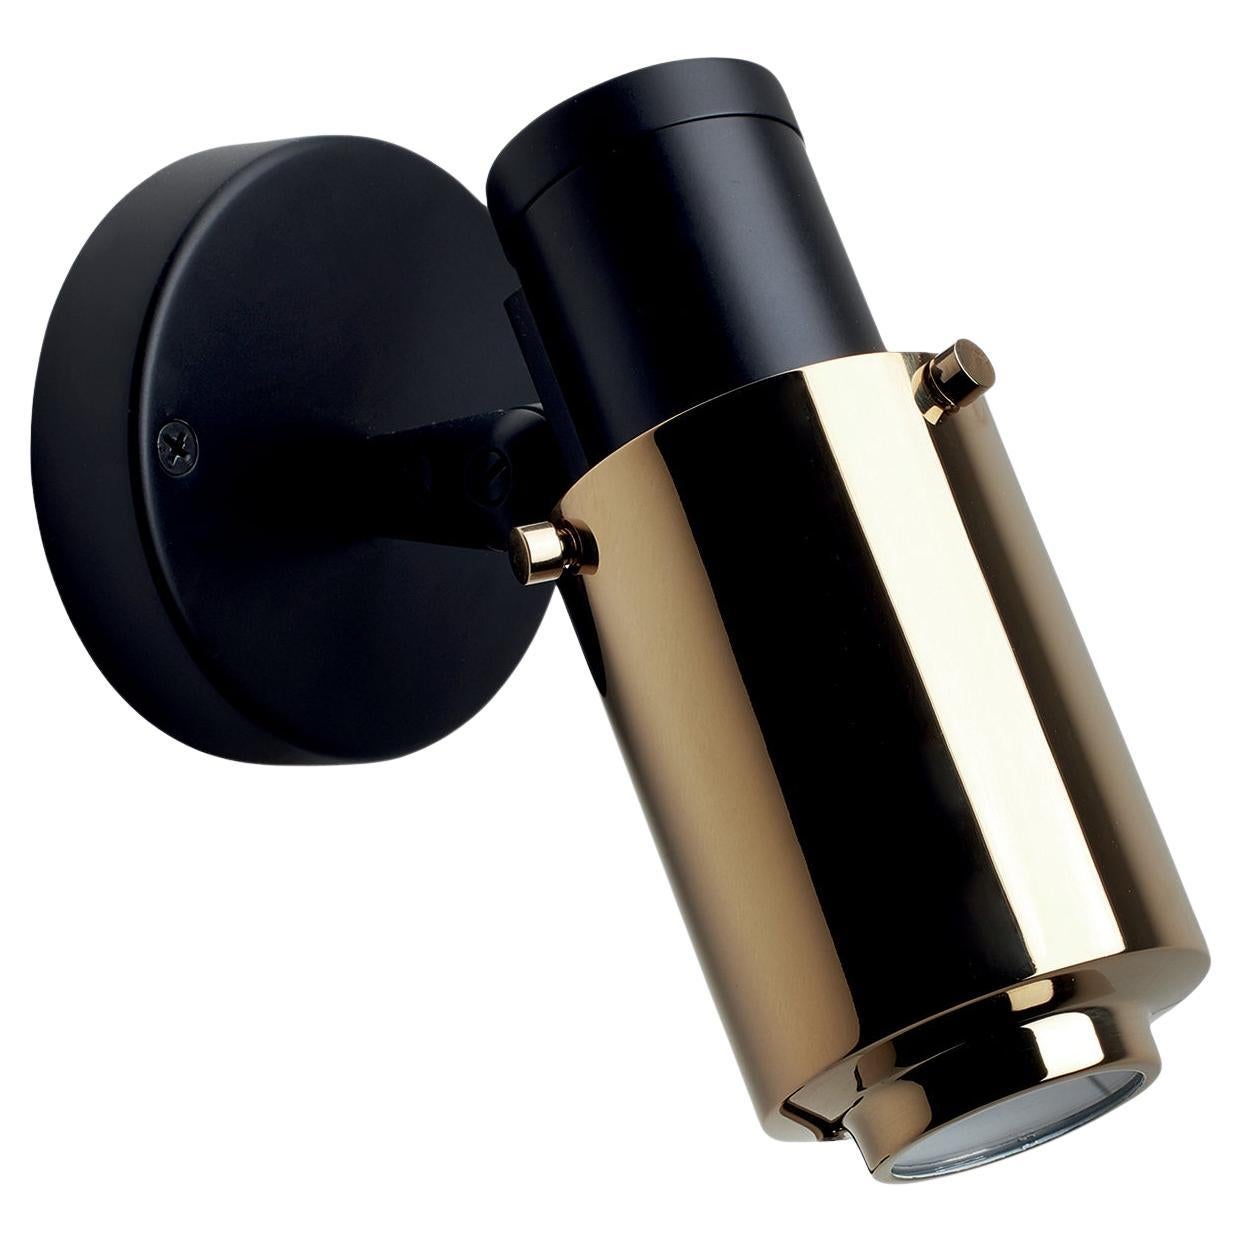 DCW Editions Biny Spot LED Wall Lamp in Black-Gold Steel and Aluminium w/o Stick For Sale